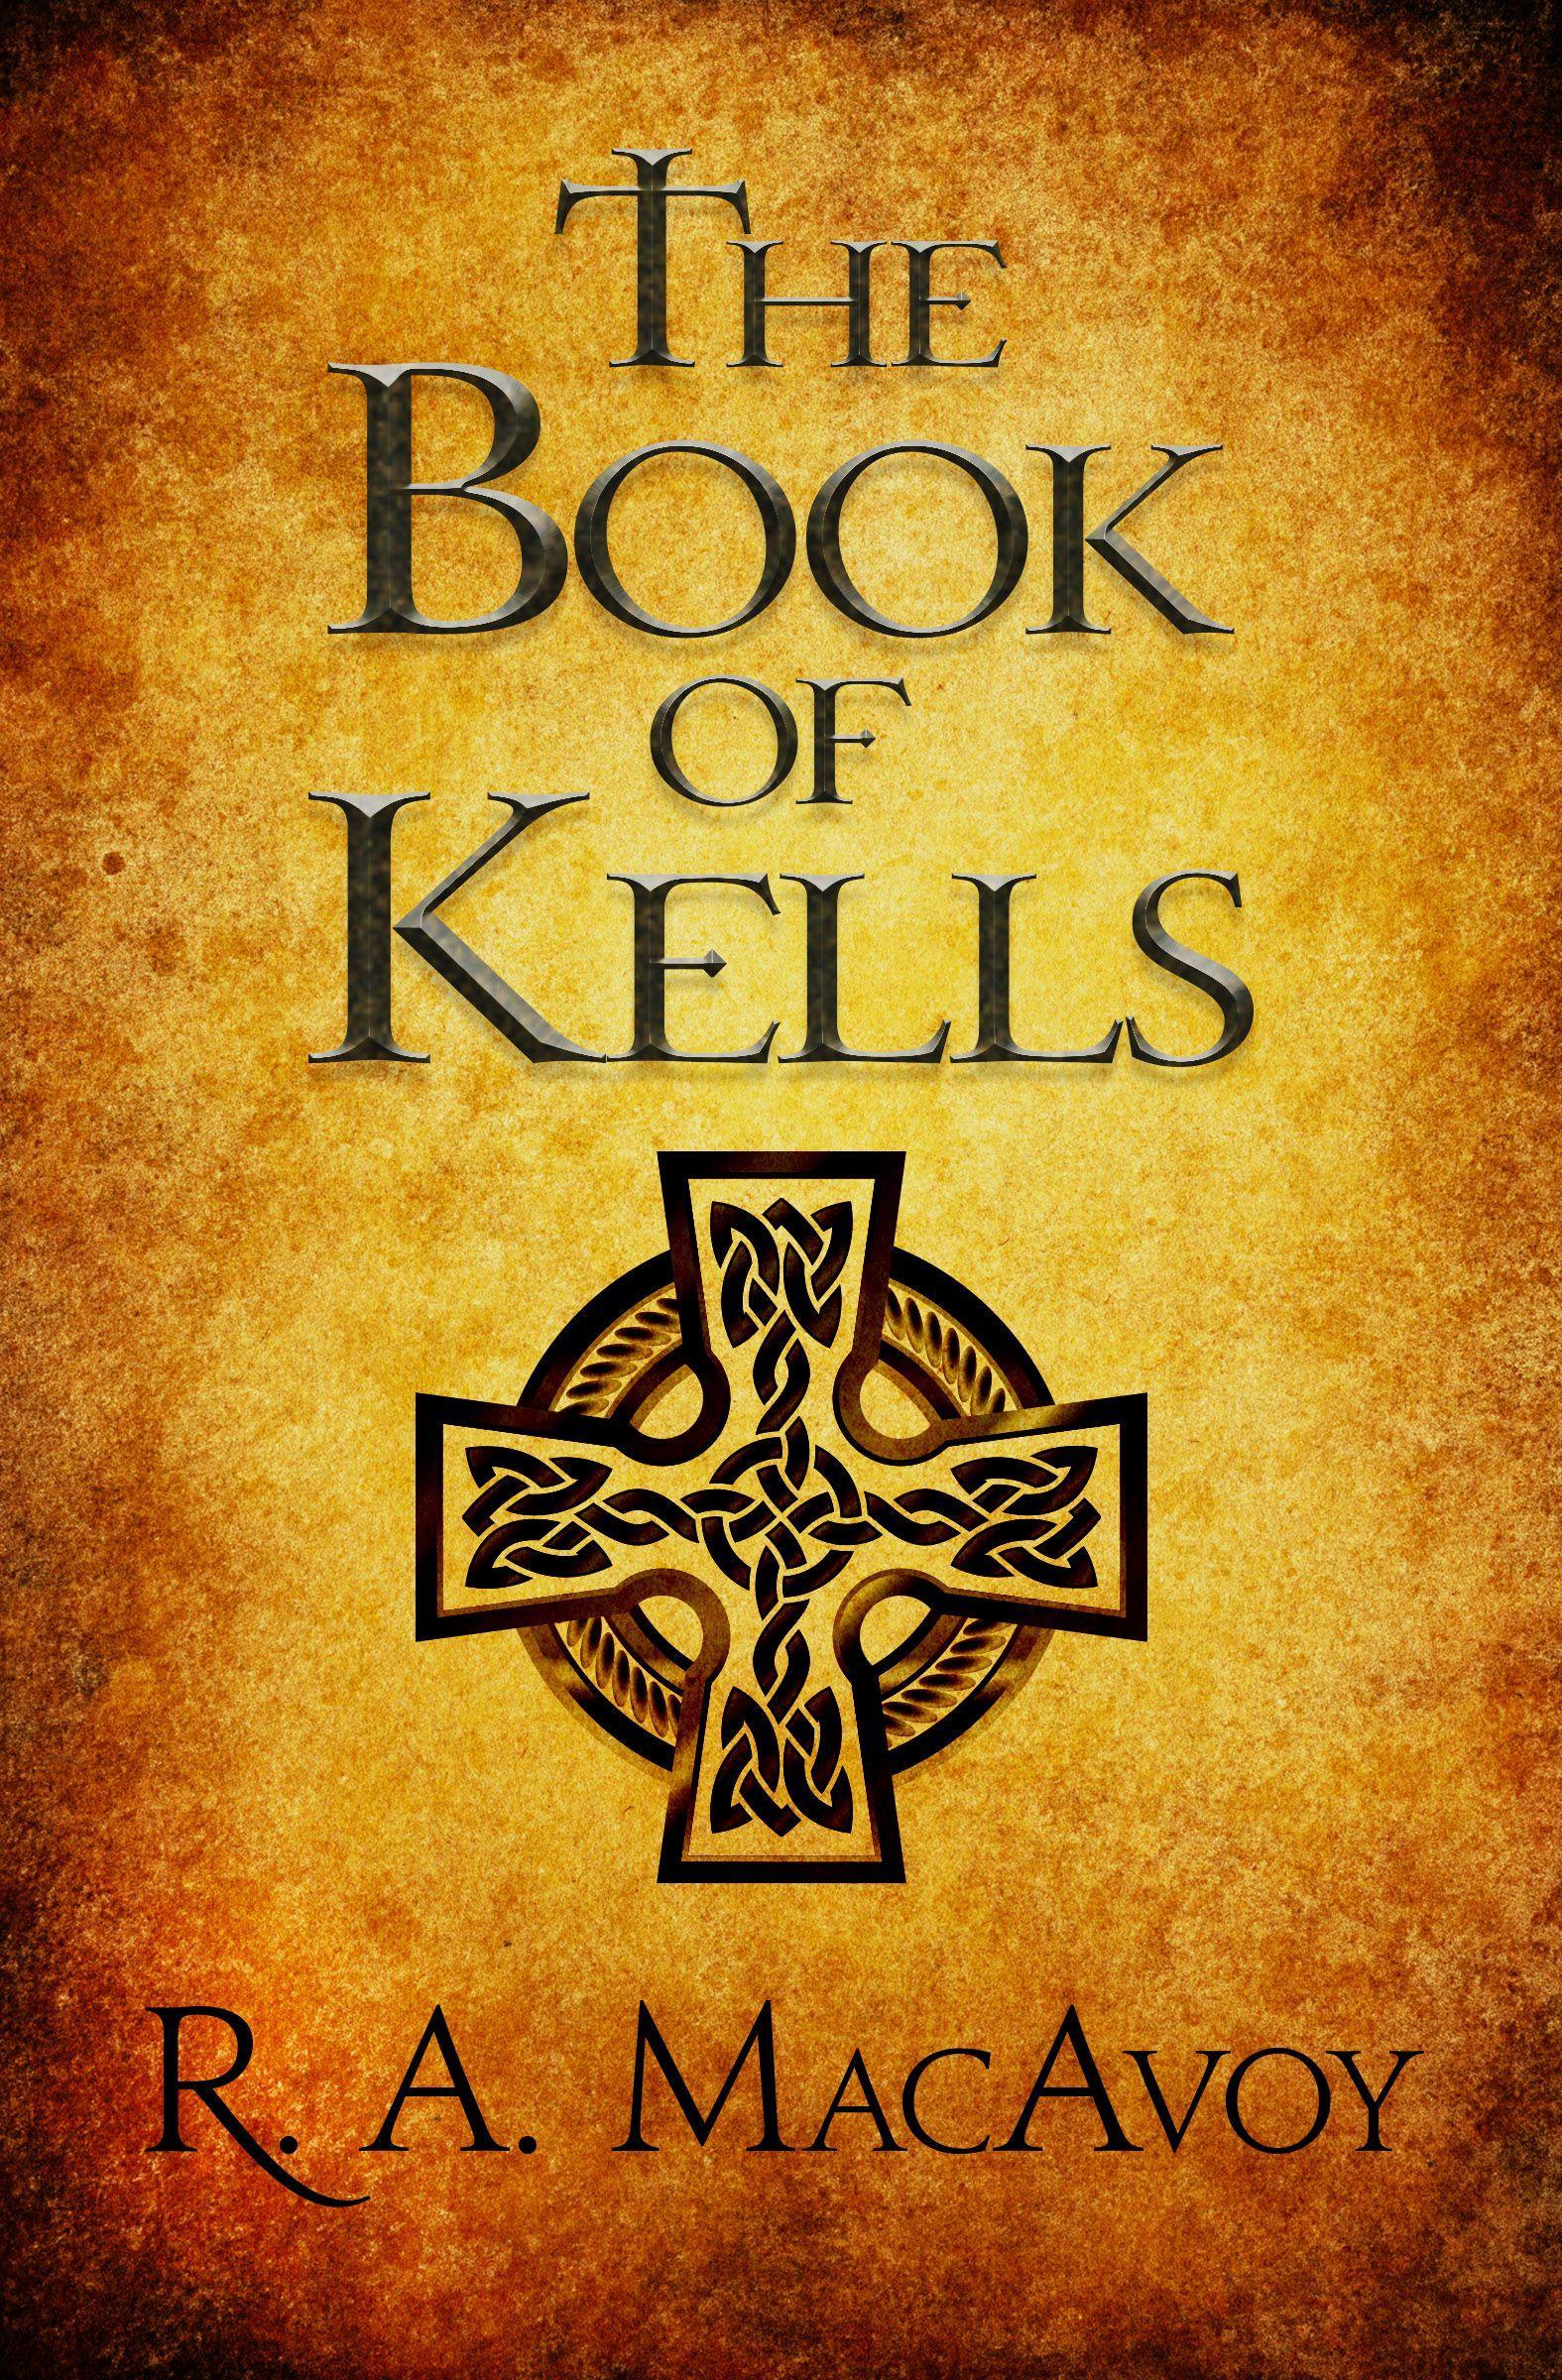 The Book of Kells - MacAvoy, R. a.